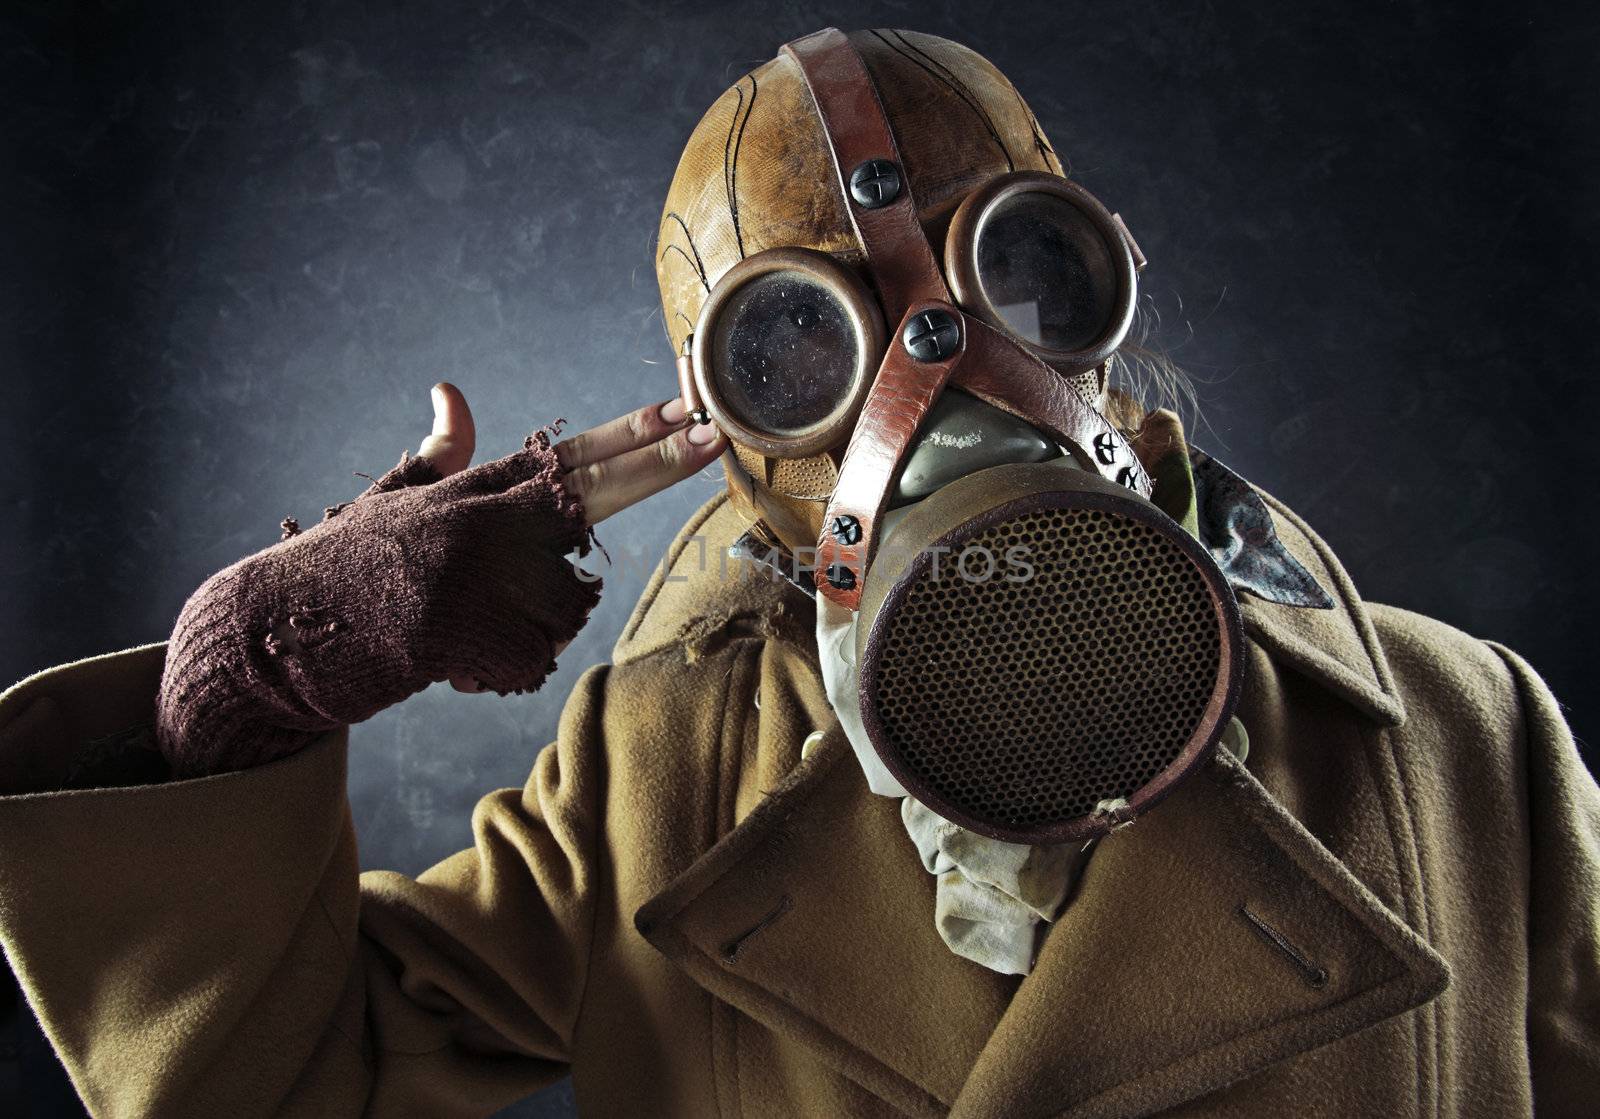 grunge portrait man in gas mask pointing hand gun at his own head, suicide